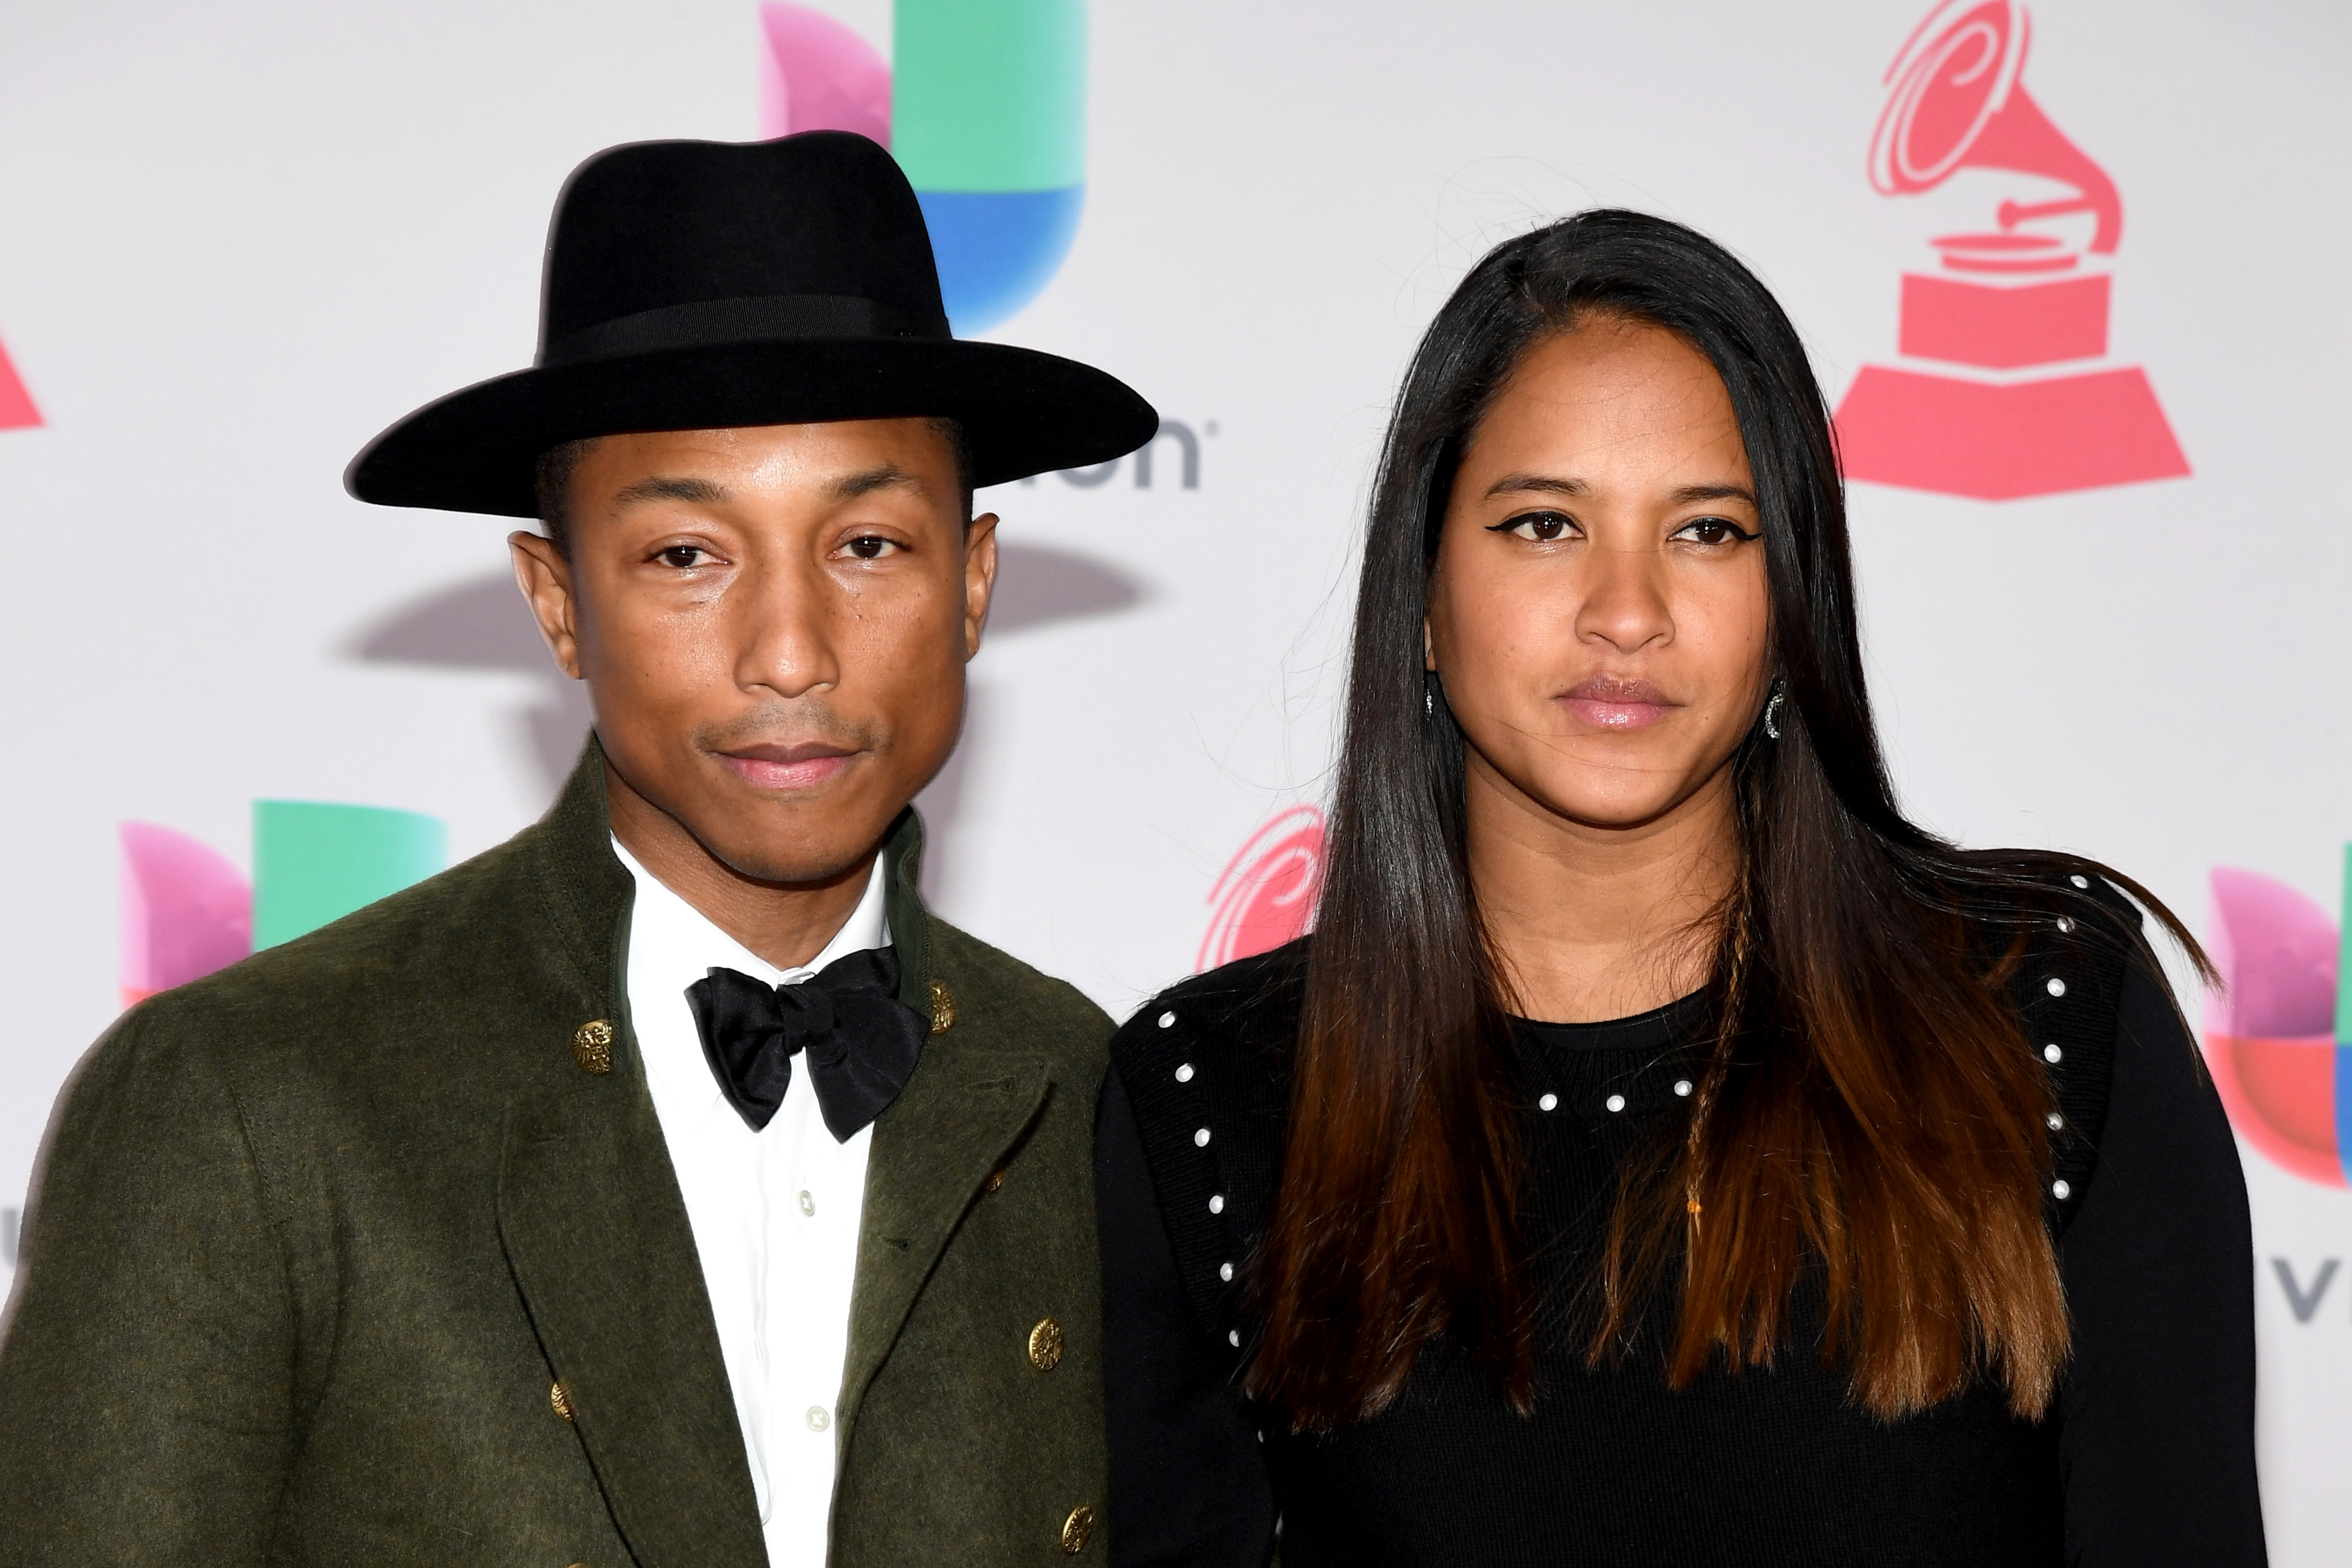 Pharrell Williams & Wife Helen Welcome Triplets - Page 2 of 2